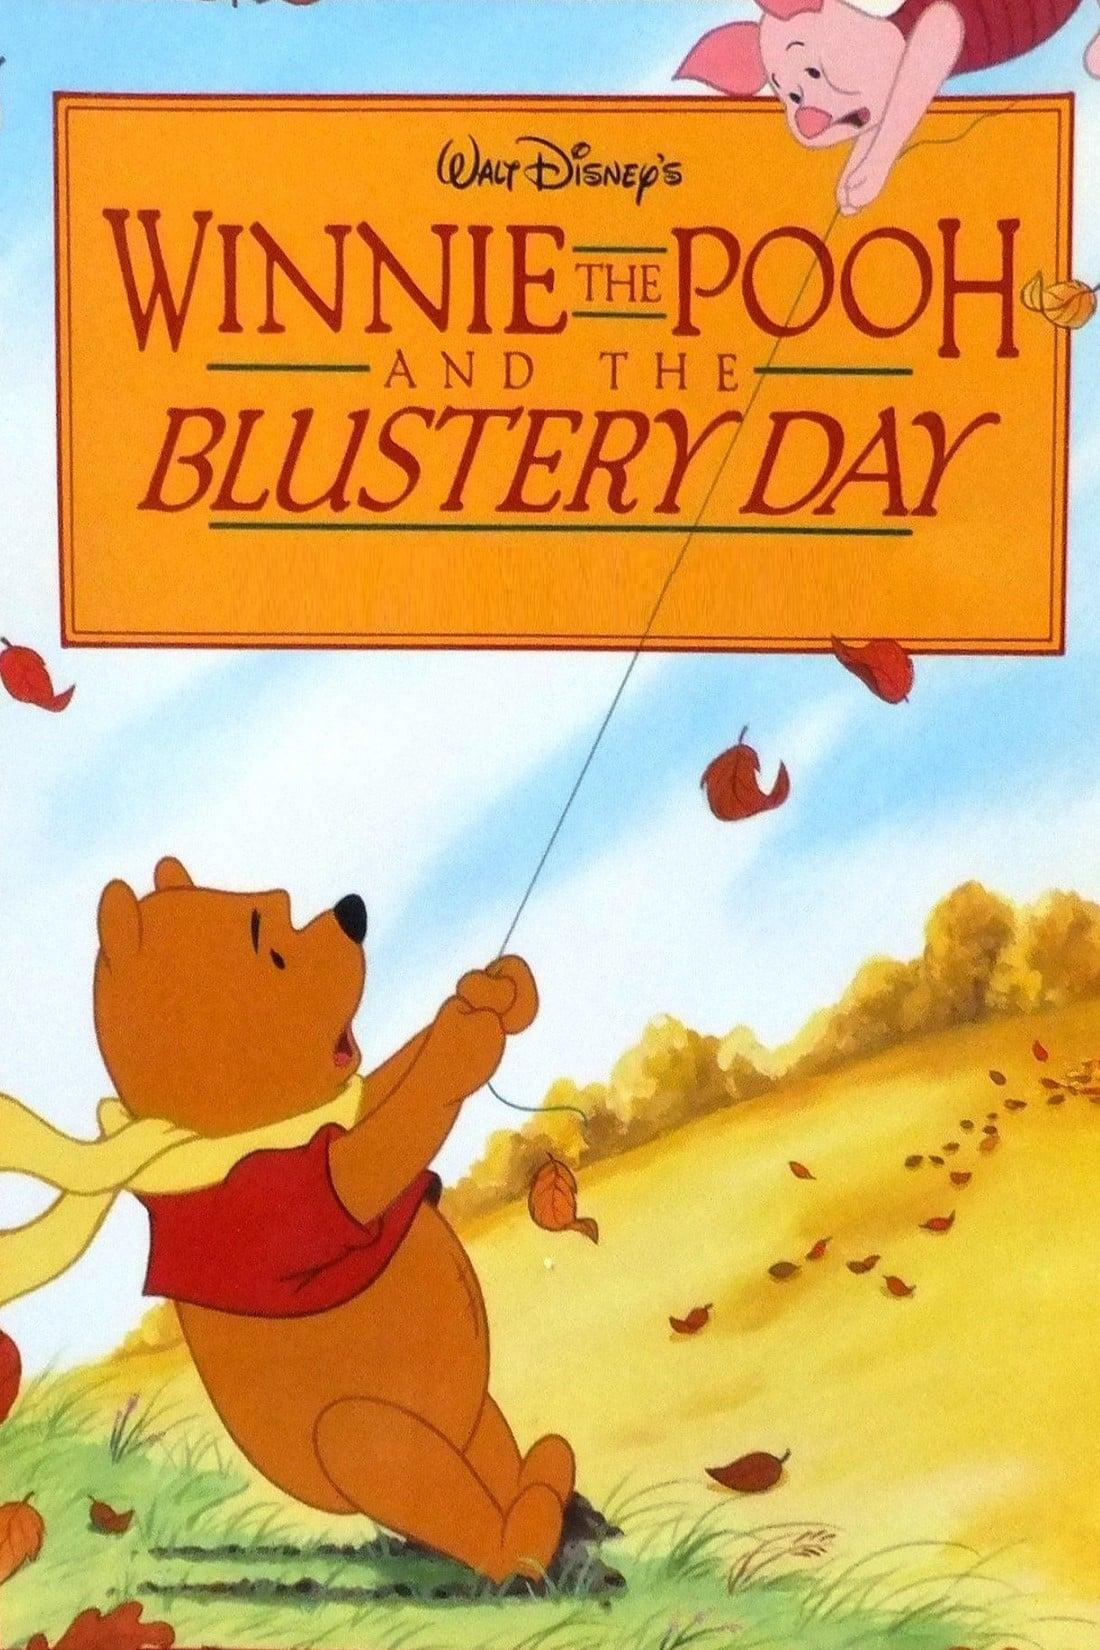 Winnie the Pooh and the Blustery Day poster